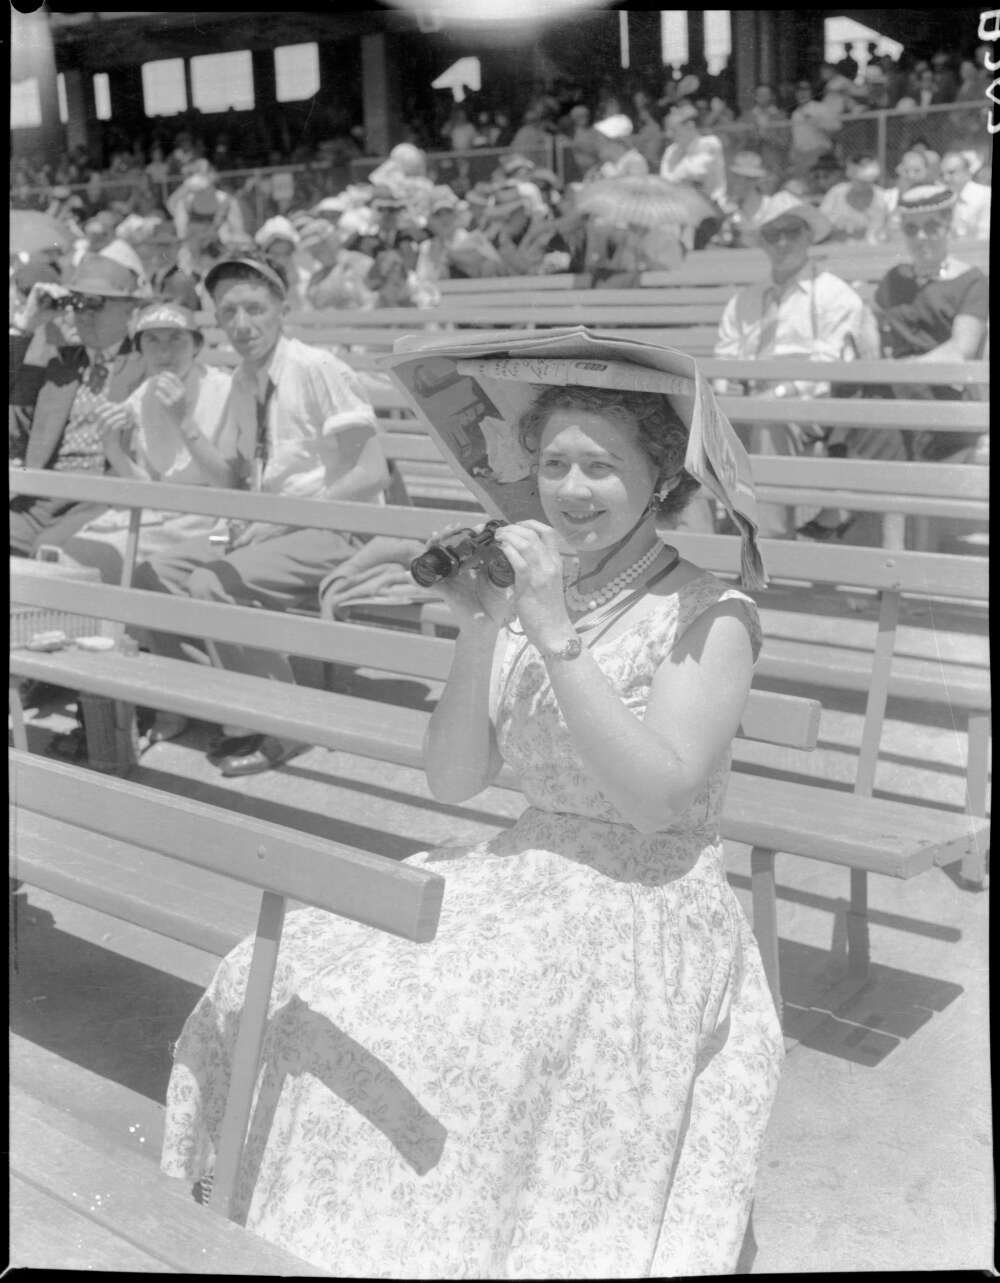 Woman sitting in the stands of a sports arena in a nice floral dress, holding up binoculars and wearing a large sunhat made out of newspapers